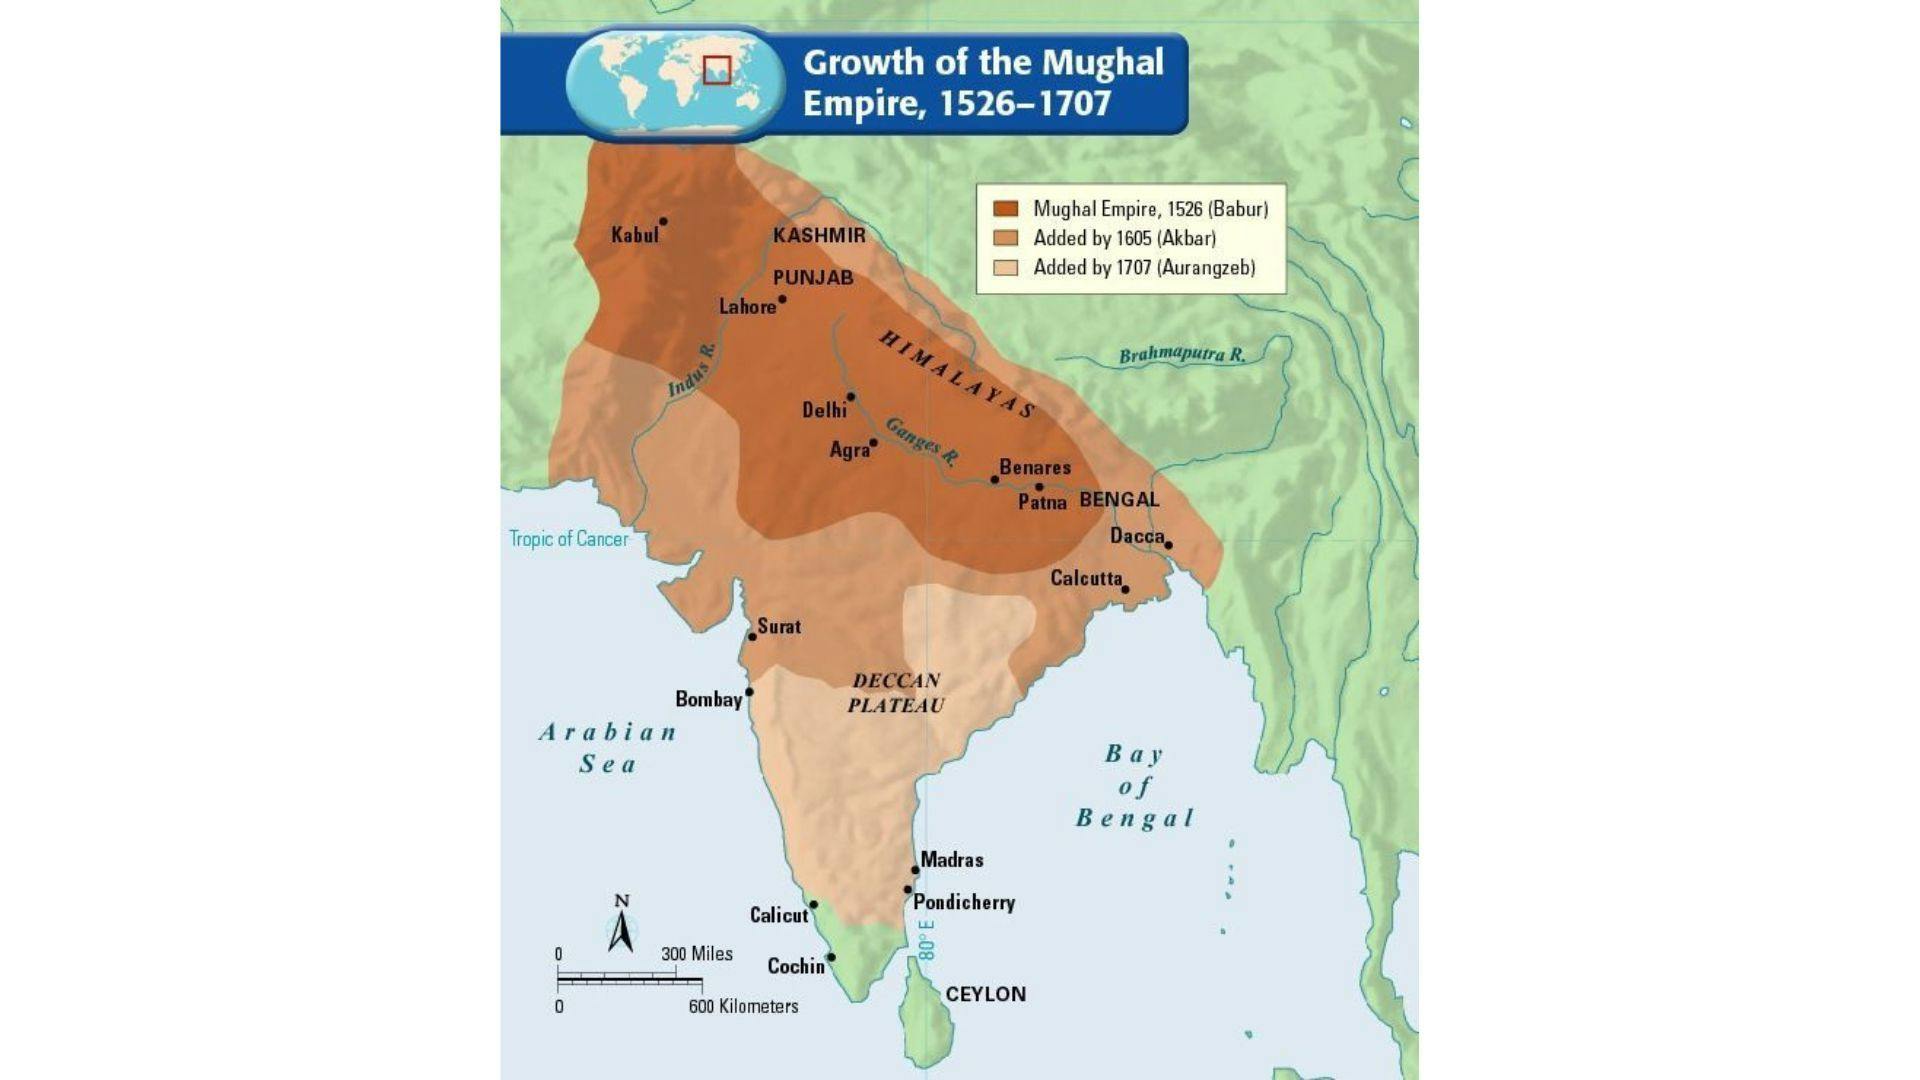 Growth of the Mughal Empire under Akbar | Wikimedia Commons